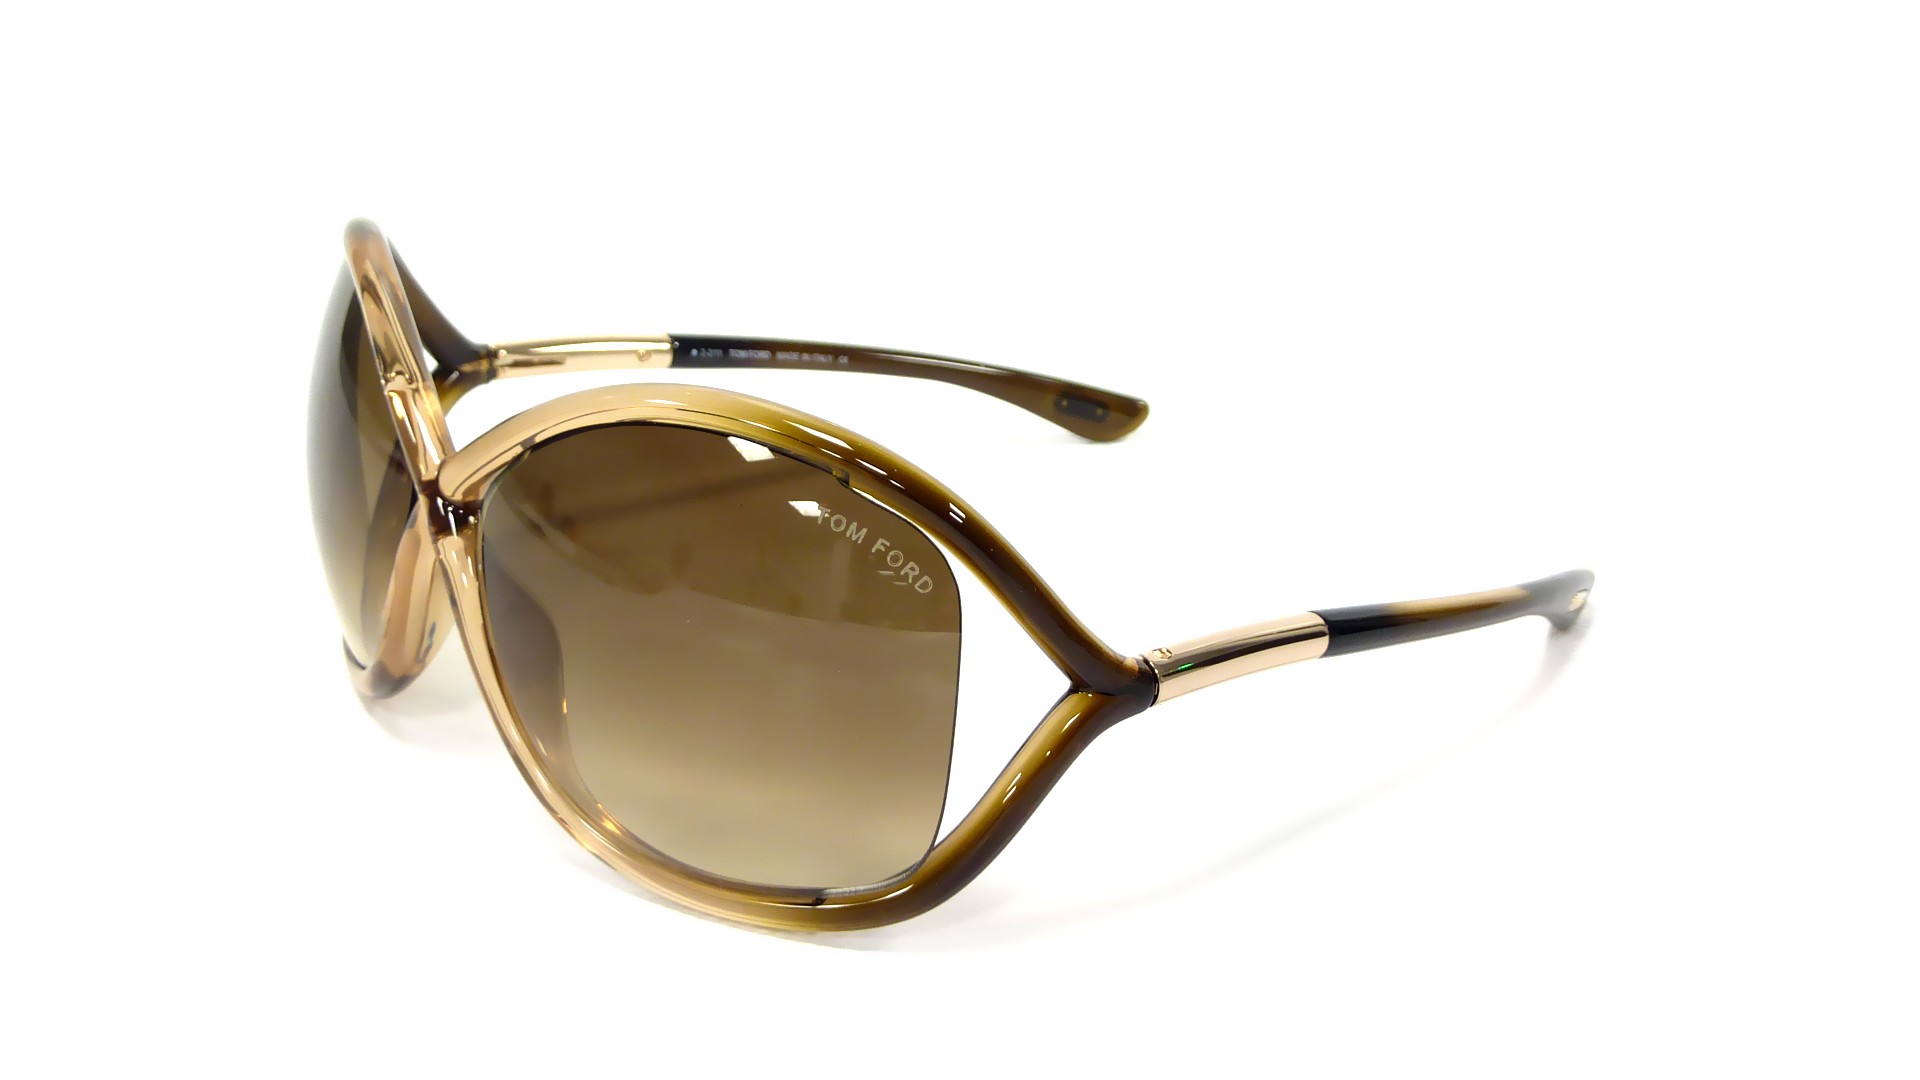 Tom ford whitney sunglasses brown #1